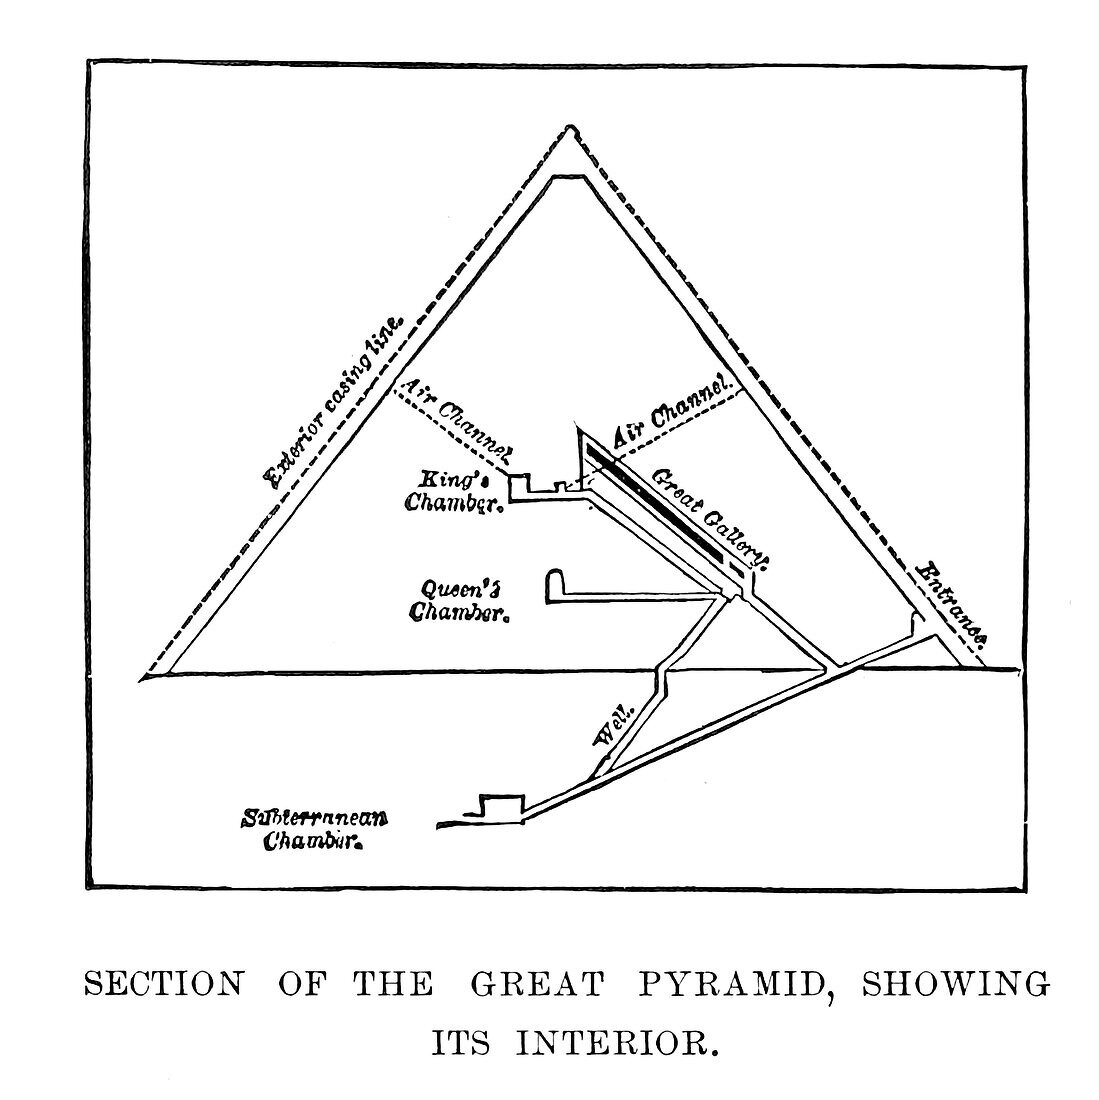 Section of the Great Pyramids, 19th century illustration